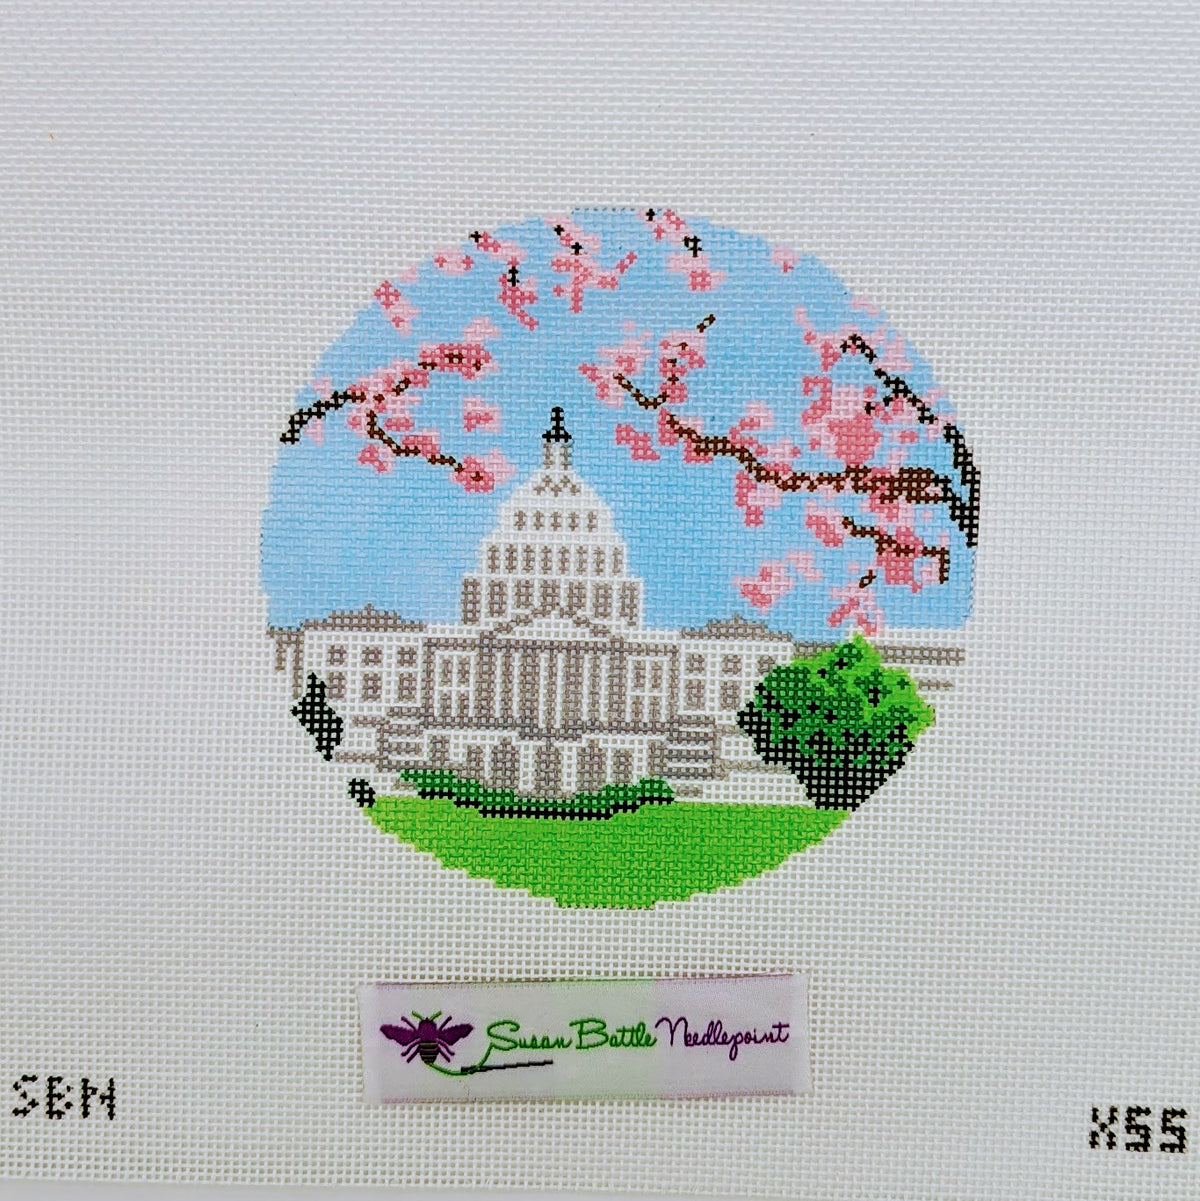 Capitol with Cherry Blossoms ornament